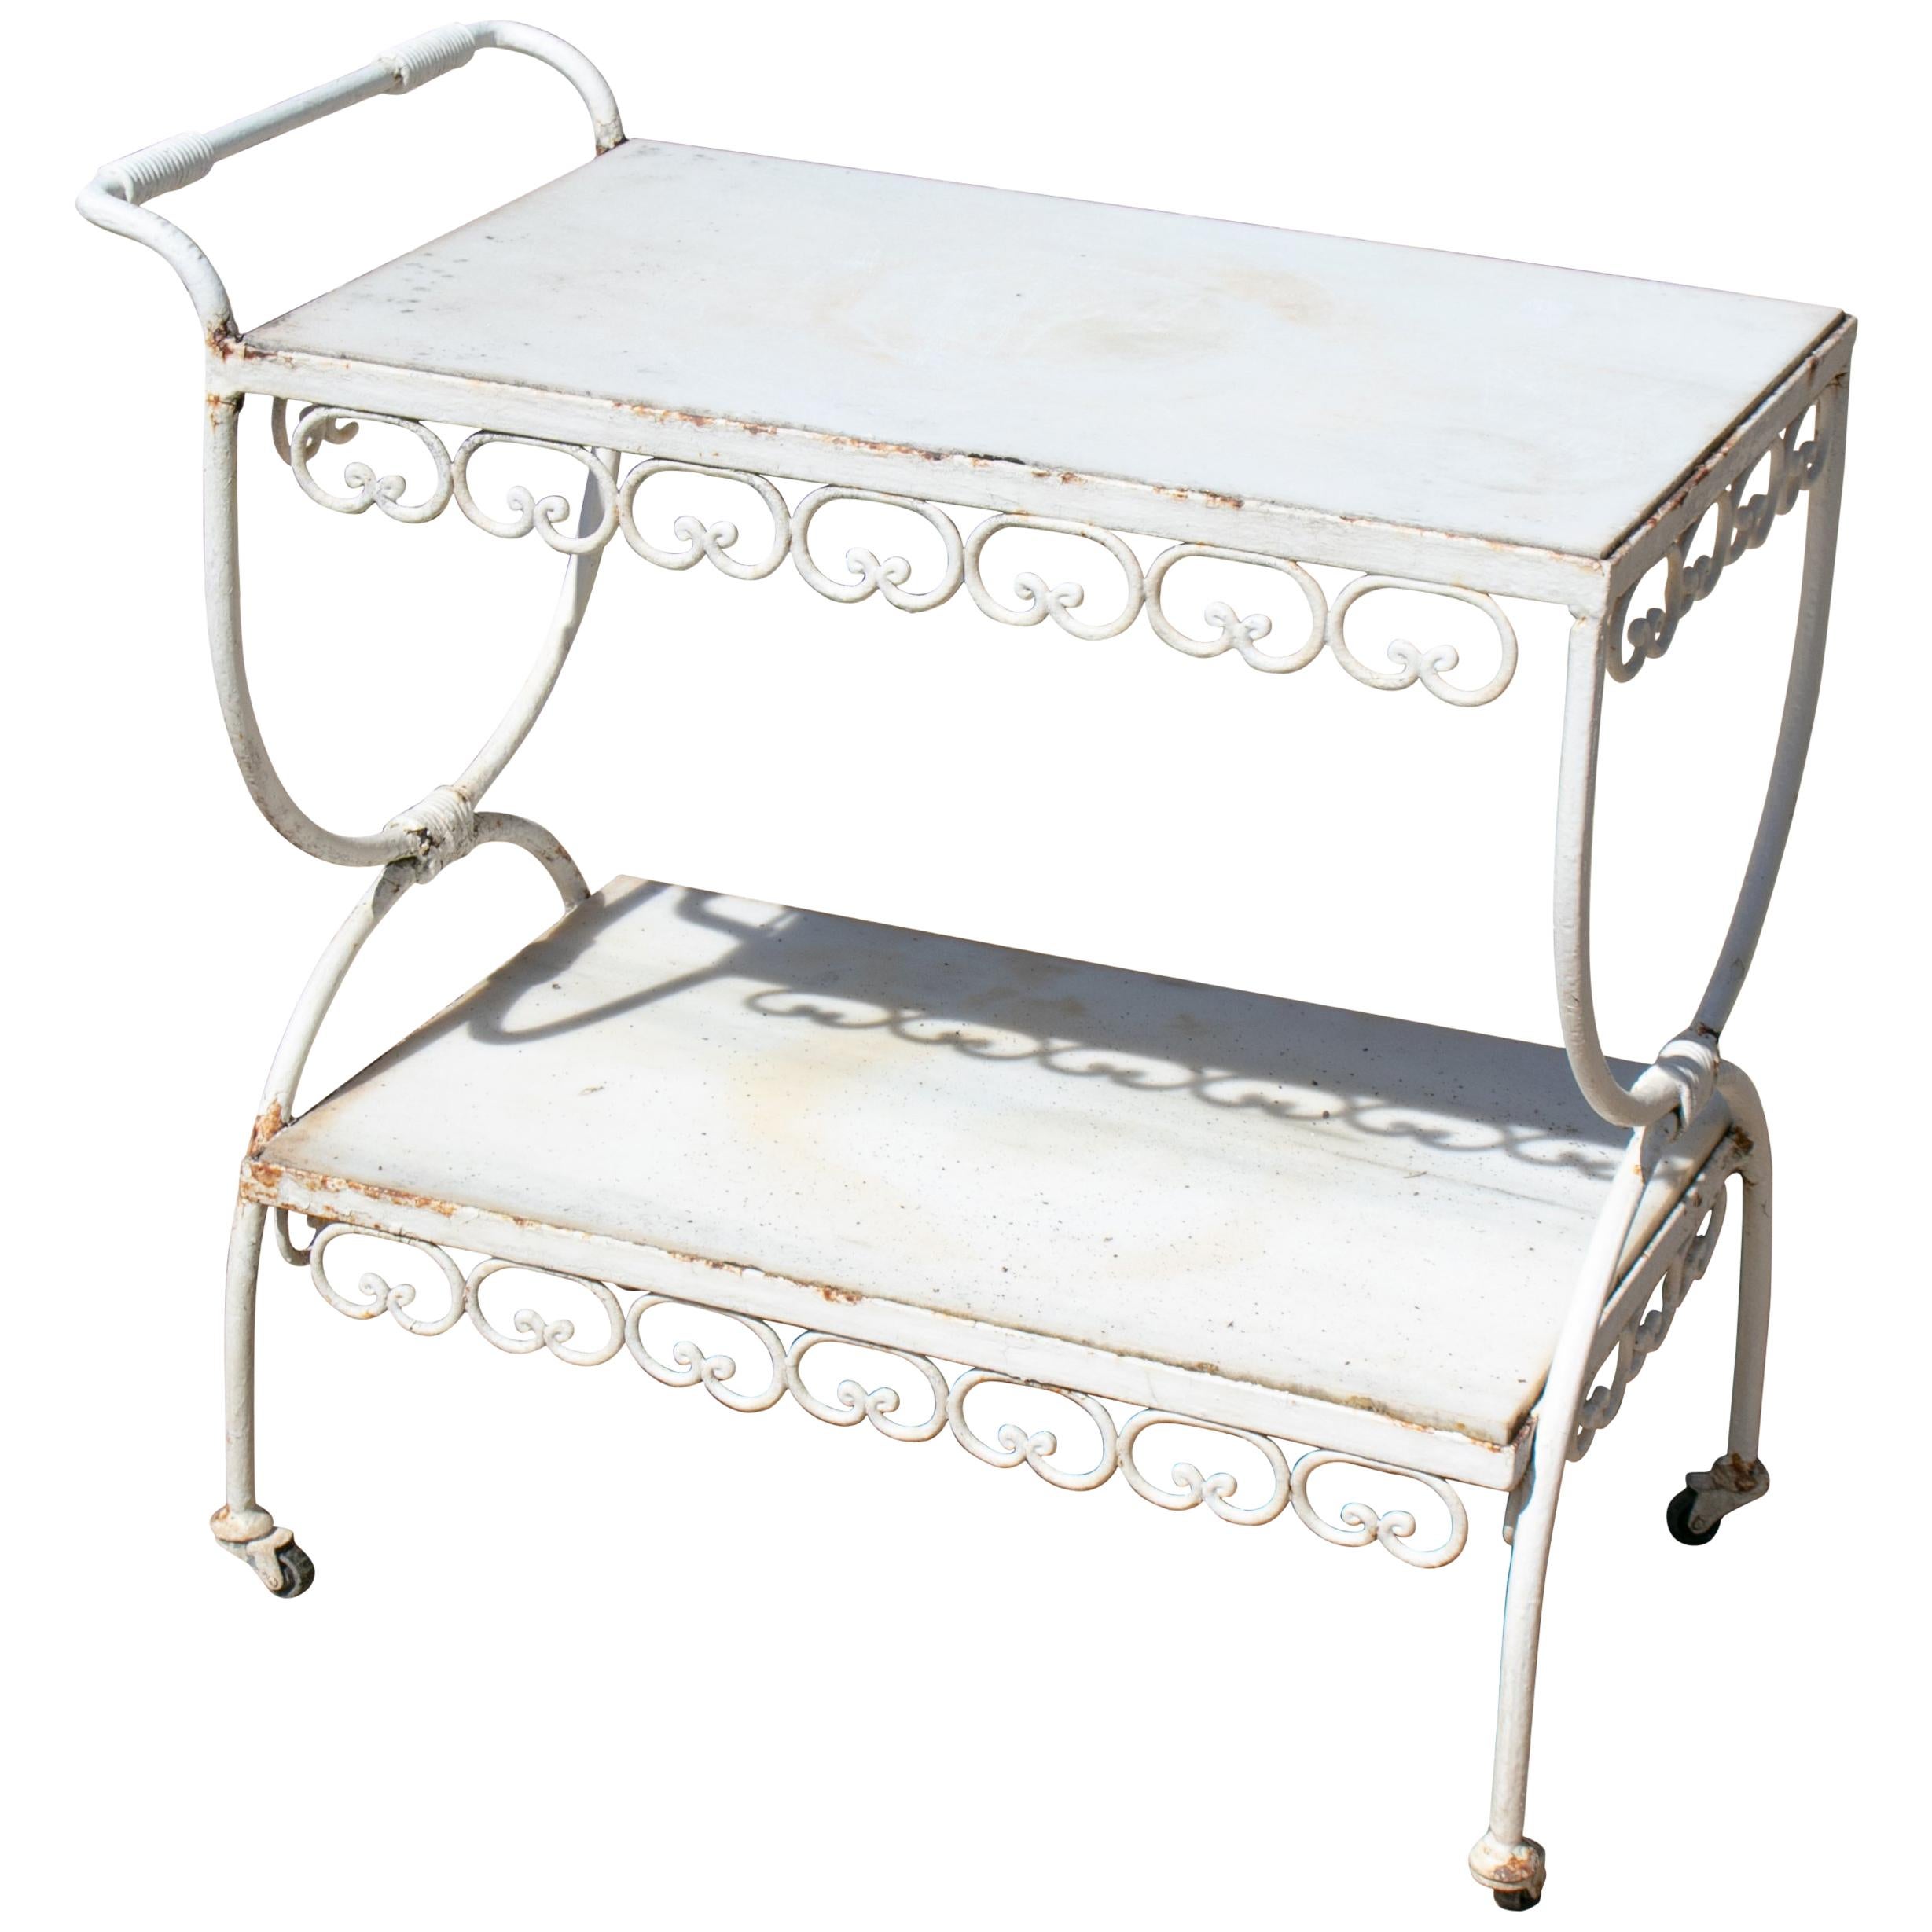 1970s Spanish Iron Drinks Trolley with Marble Shelves For Sale